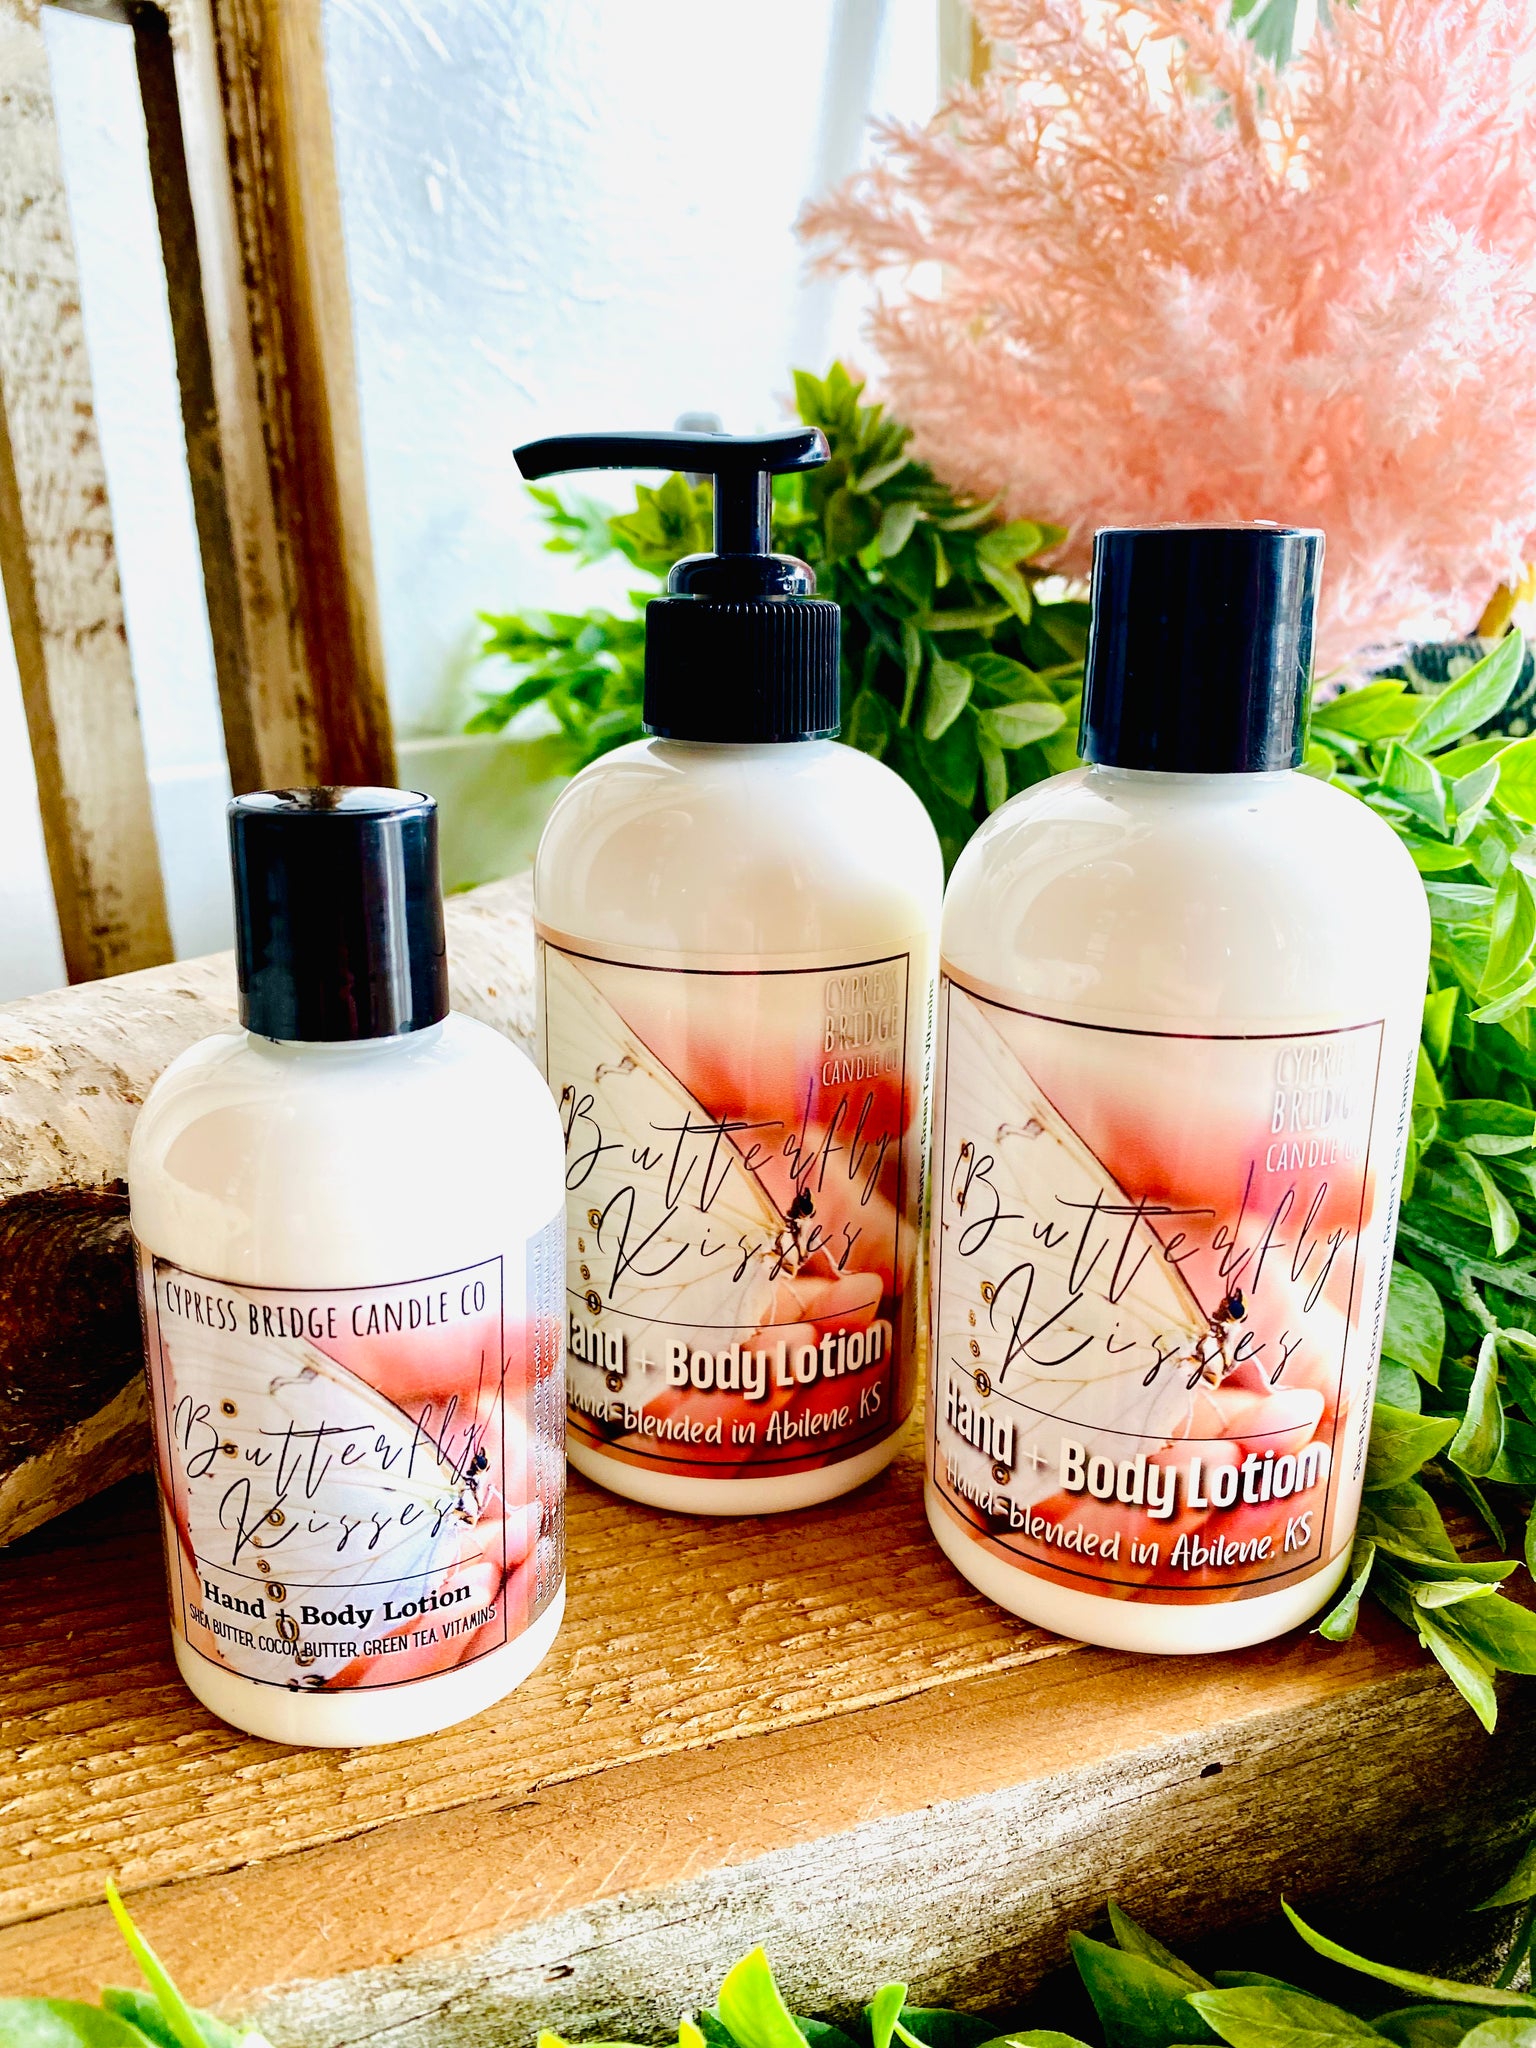 BUTTERFLY KISSES Scented All Natural Hand & Body Lotion